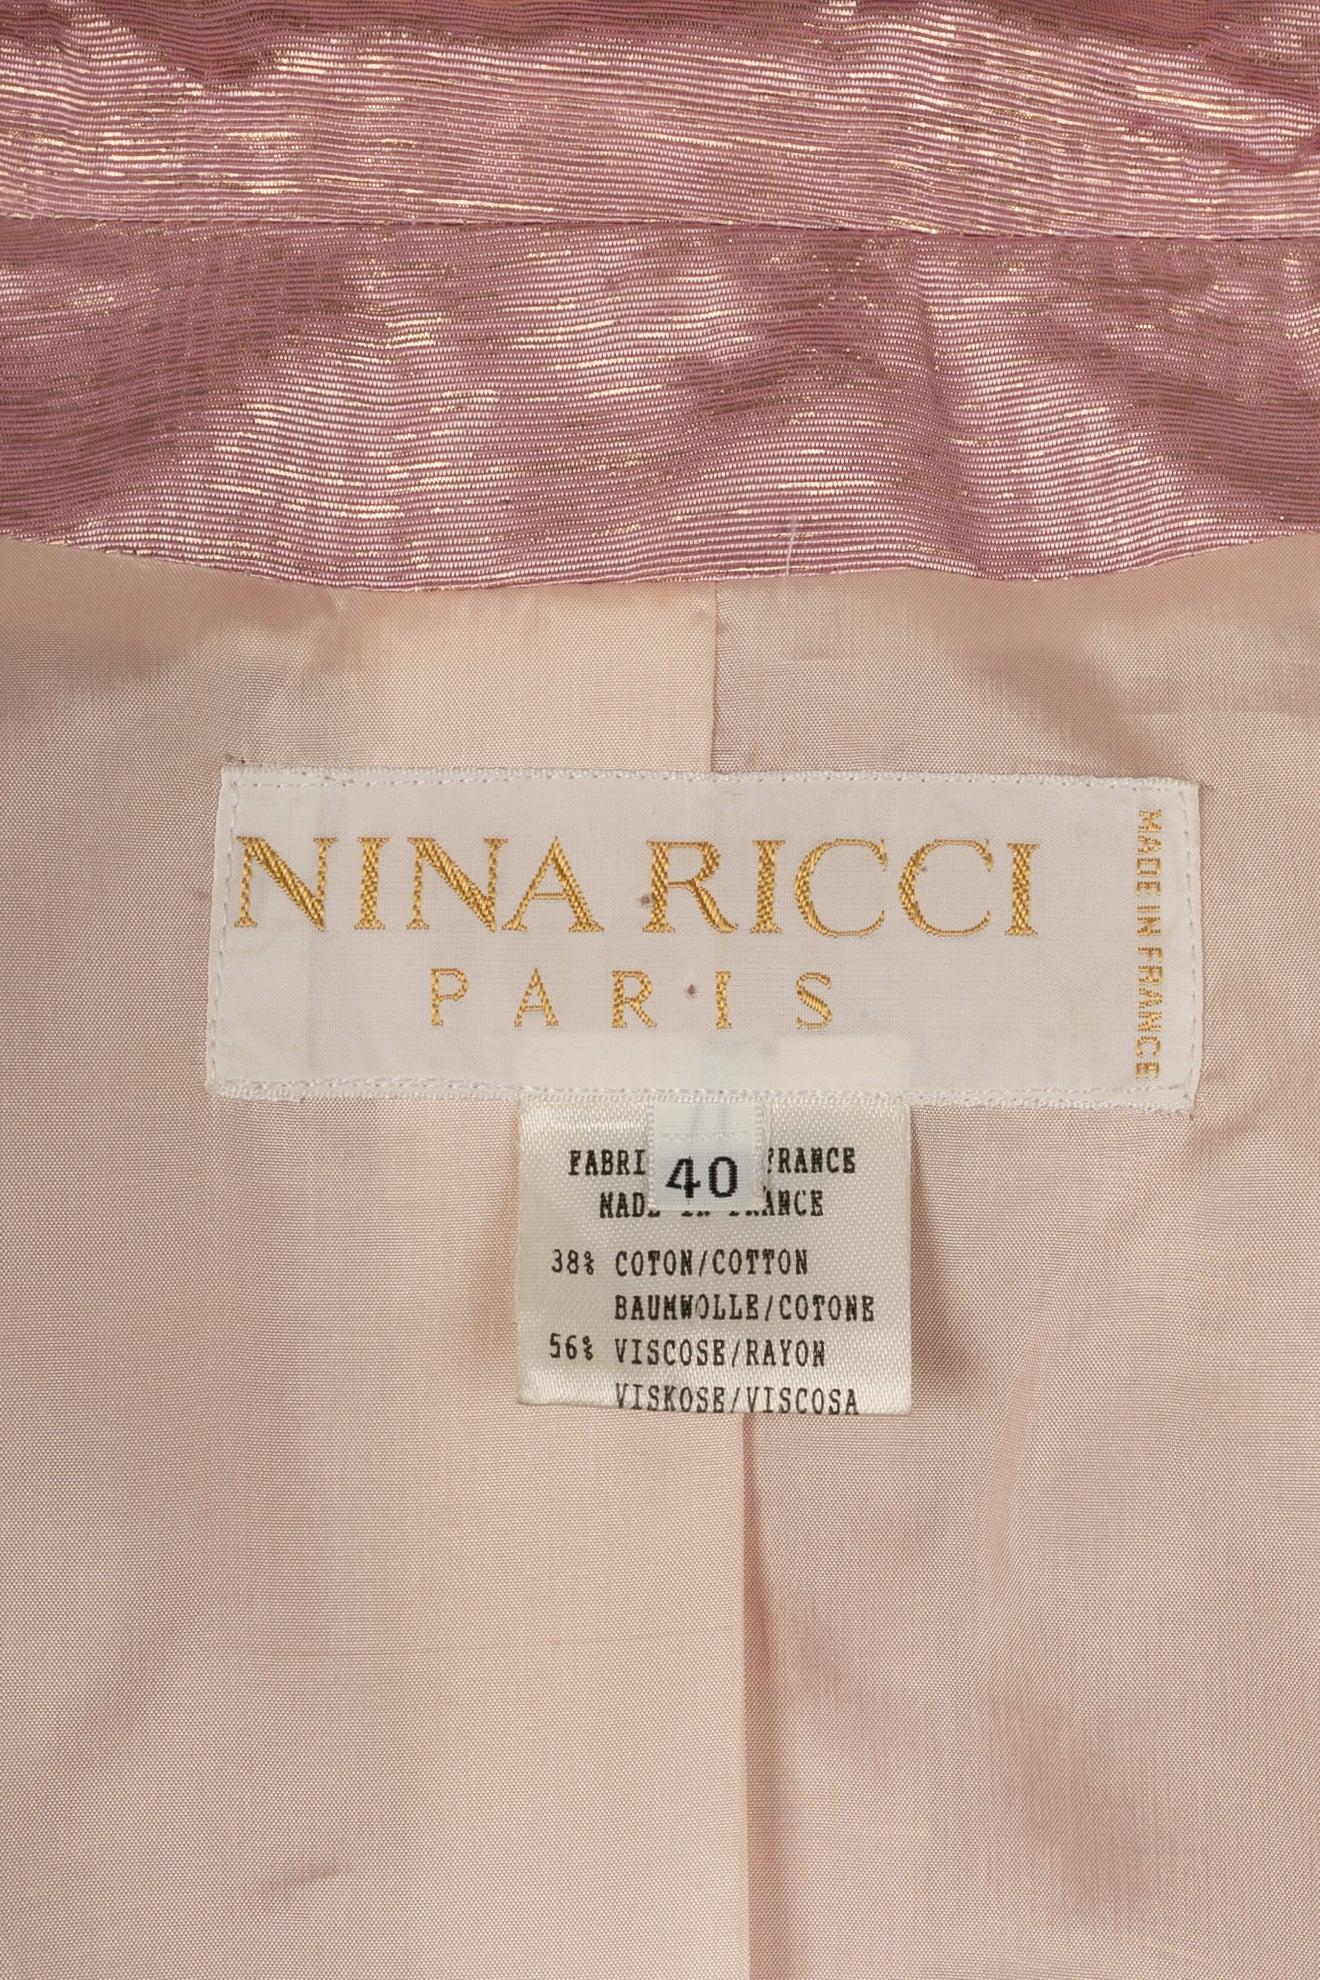 Nina Ricci Short Jacket in Pink Cotton and Golden Lame For Sale 3